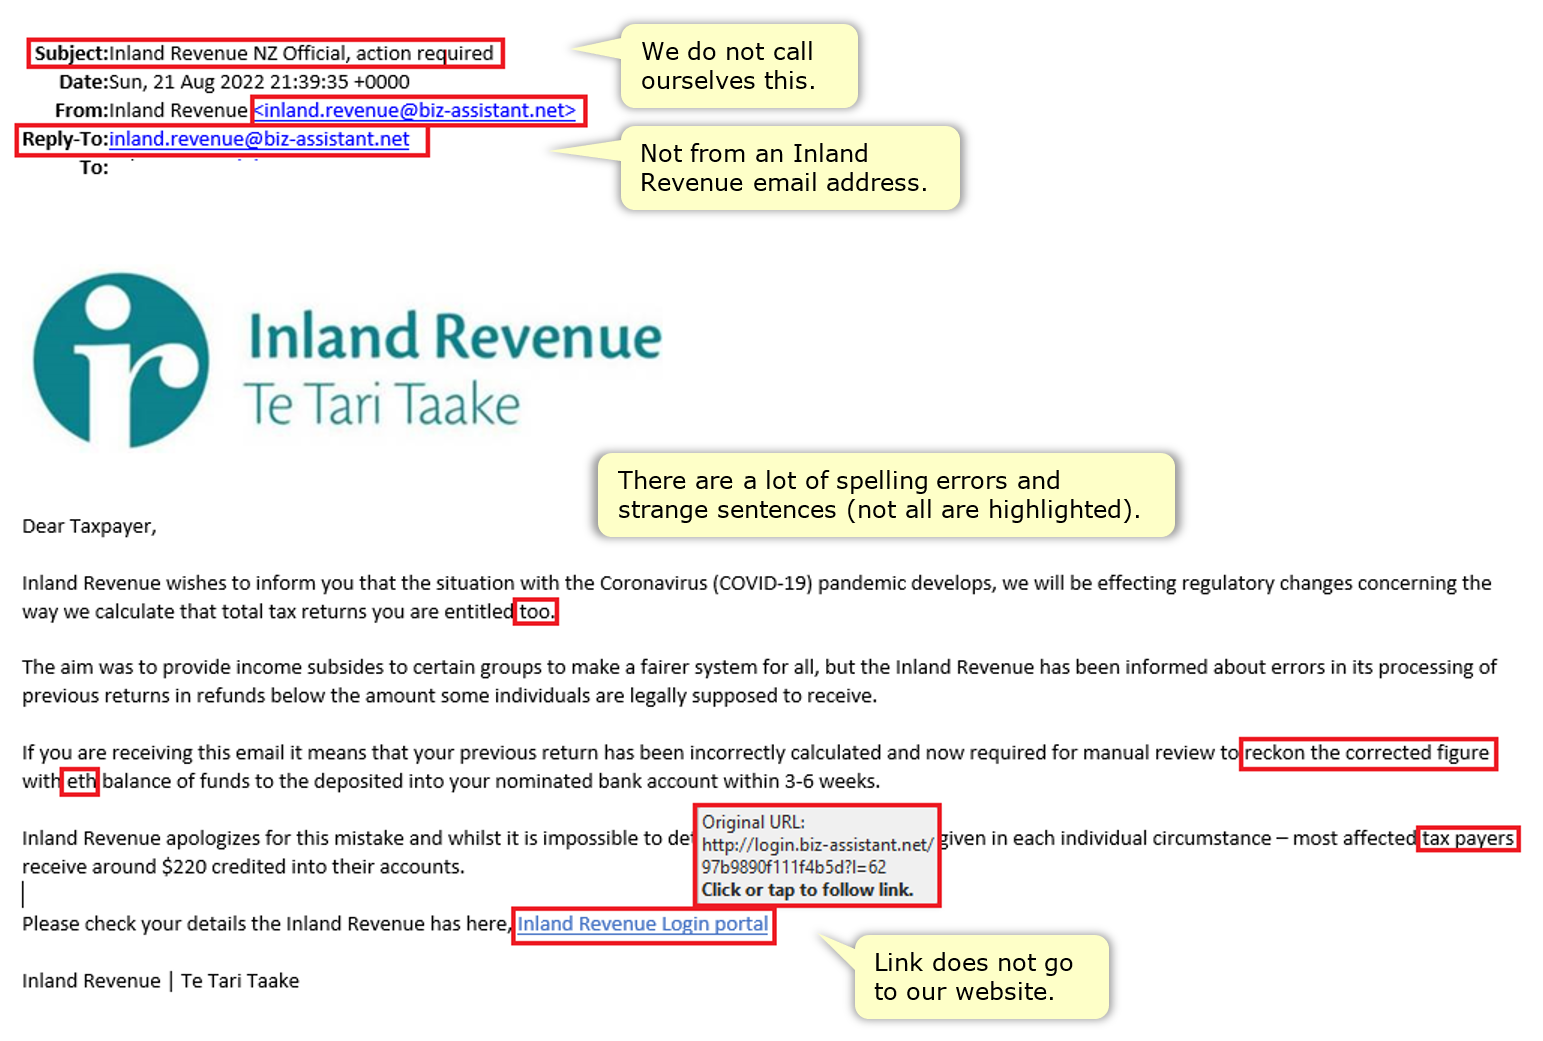 An email with highlighted content showing how it is a scam. This includes typos, and email address that is not from Inland Revenue, hyperlink that shows it does not take you to an Inland Revenue site when you hover on it.